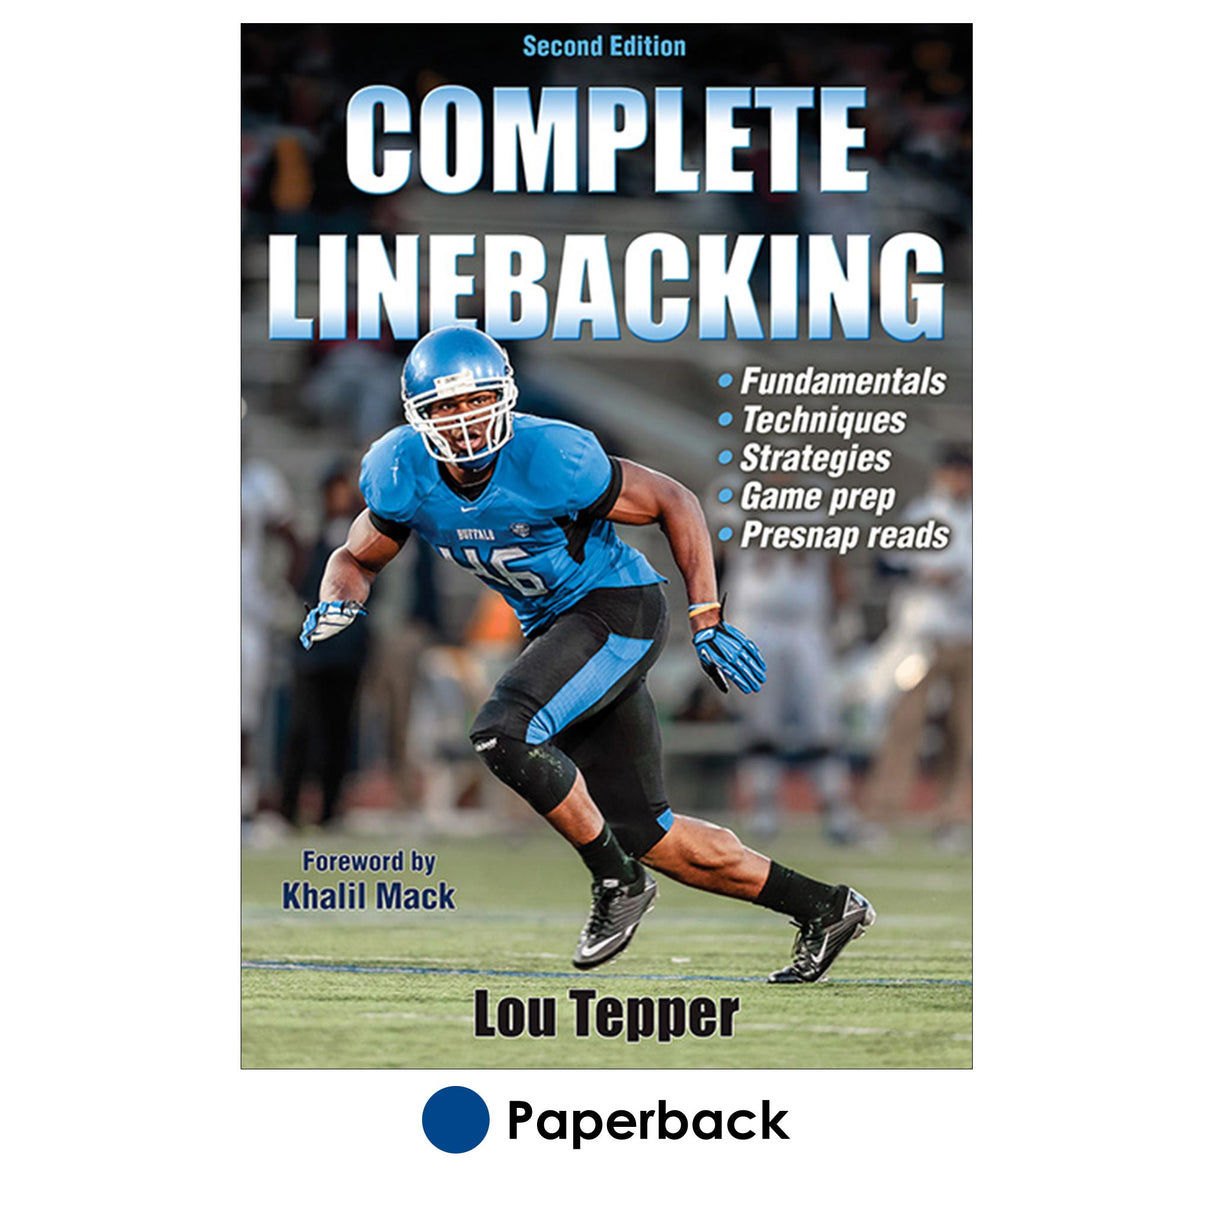 Complete Linebacking-2nd Edition